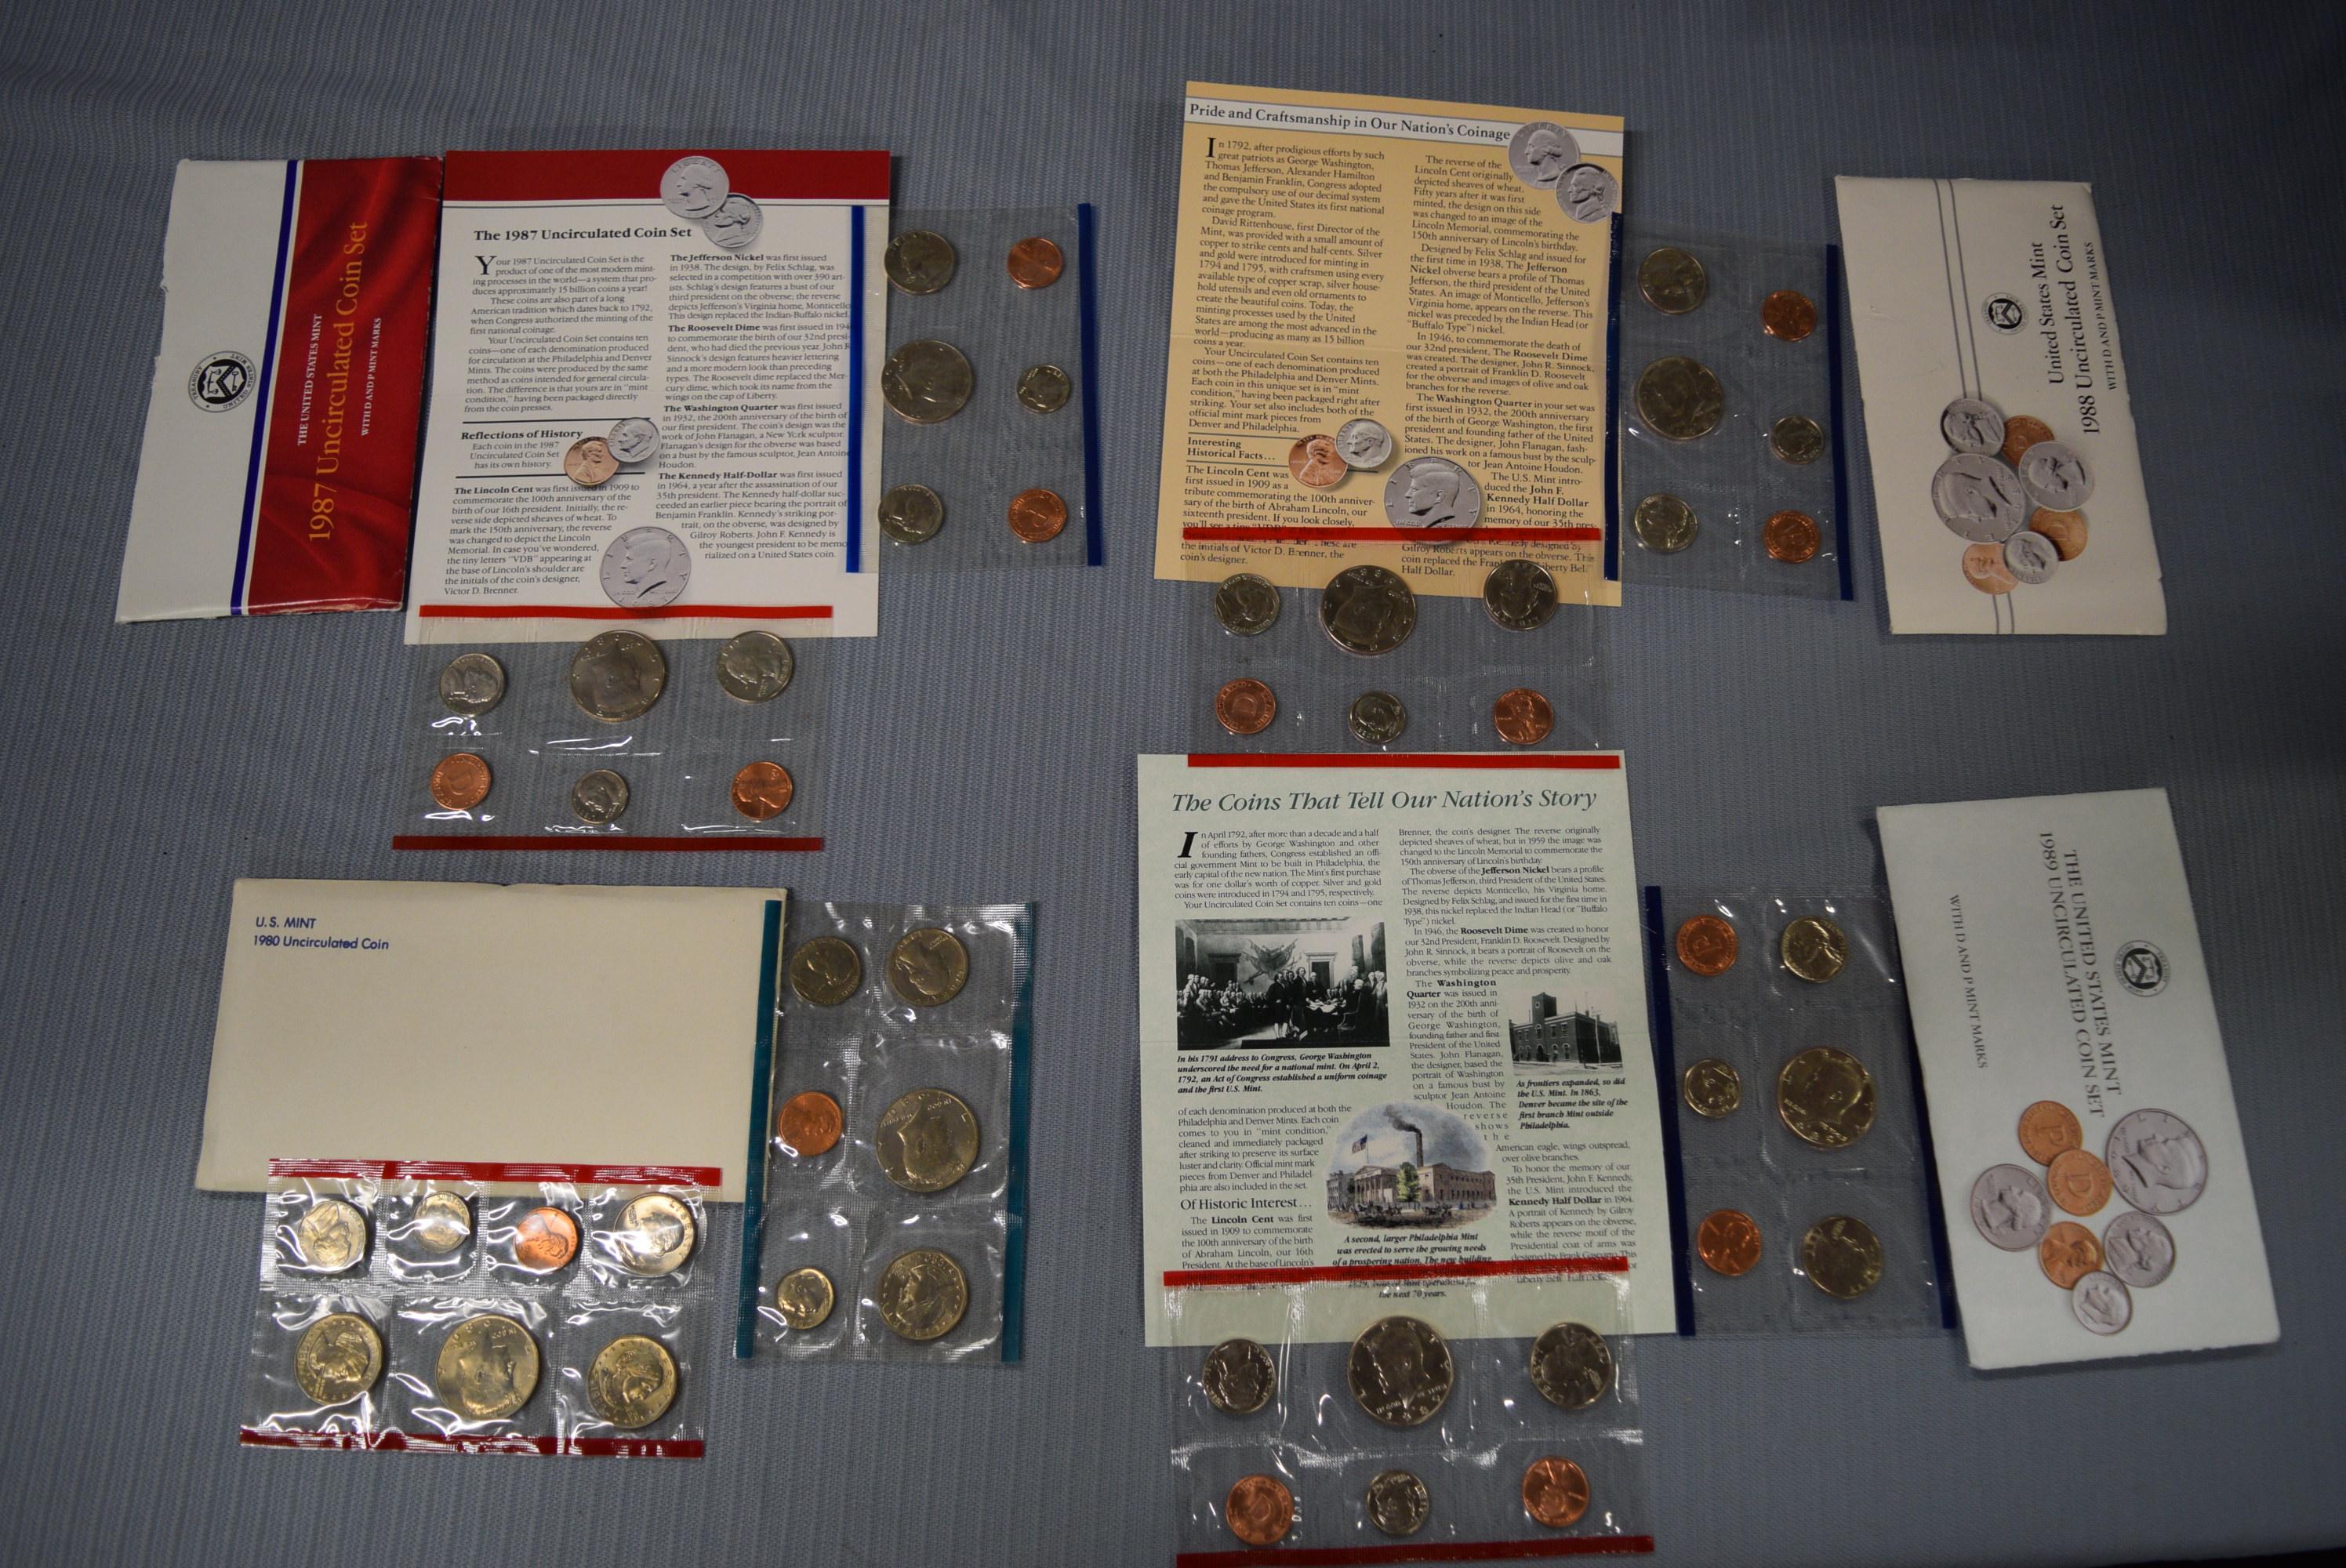 4 SETS OF UNCIRCULATED COINS!